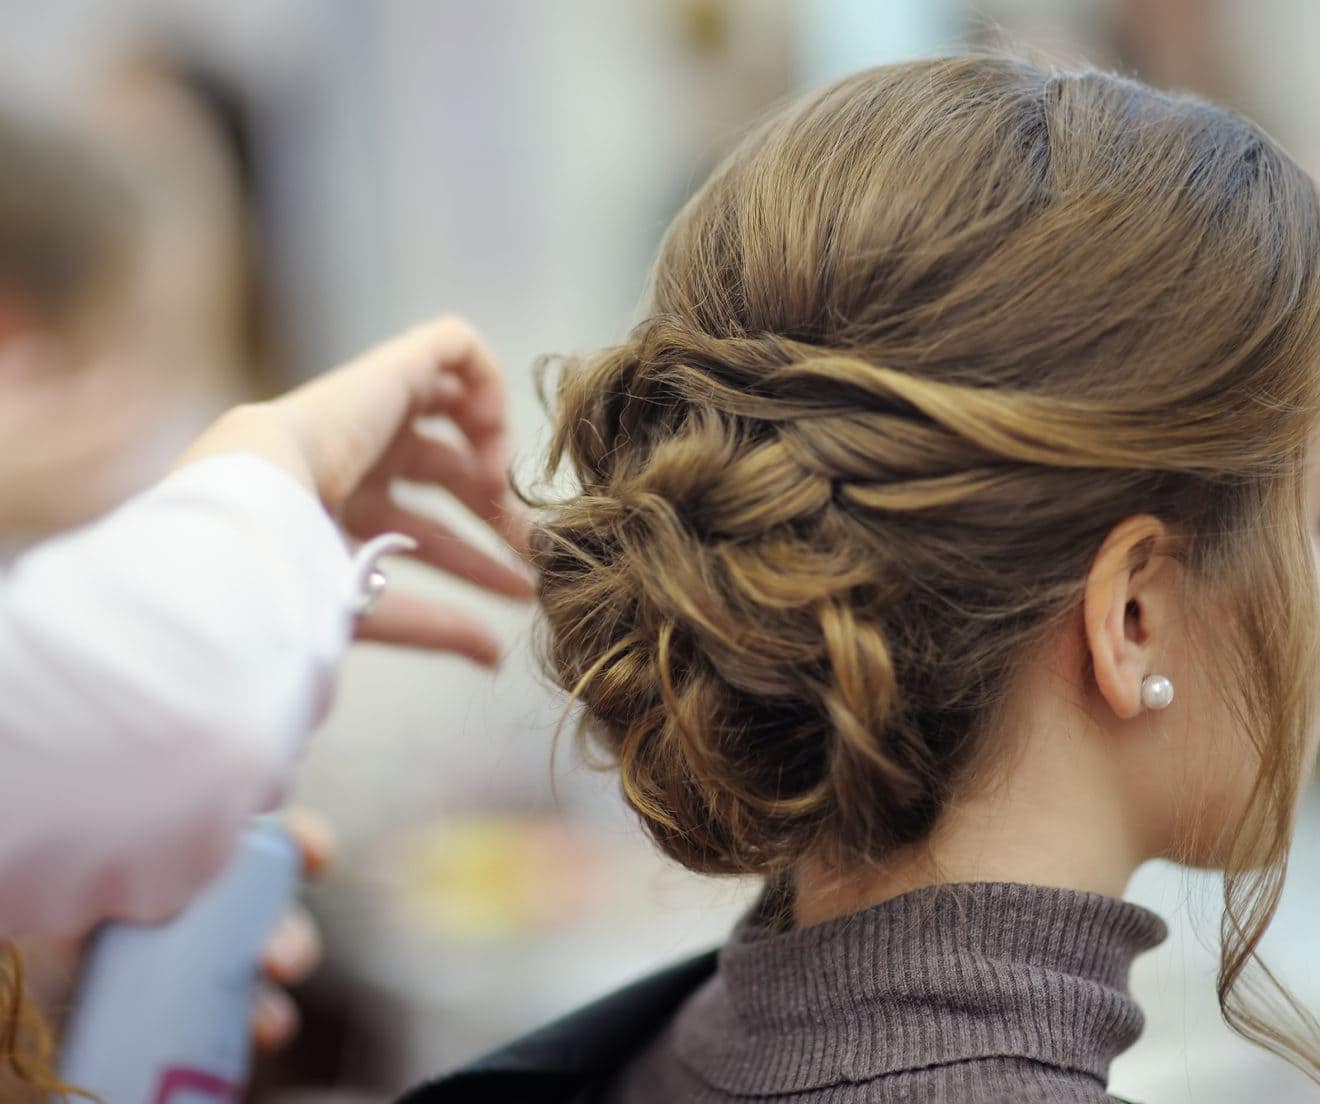 Young woman/bride wearing pearl stud getting her hair done before wedding or party.